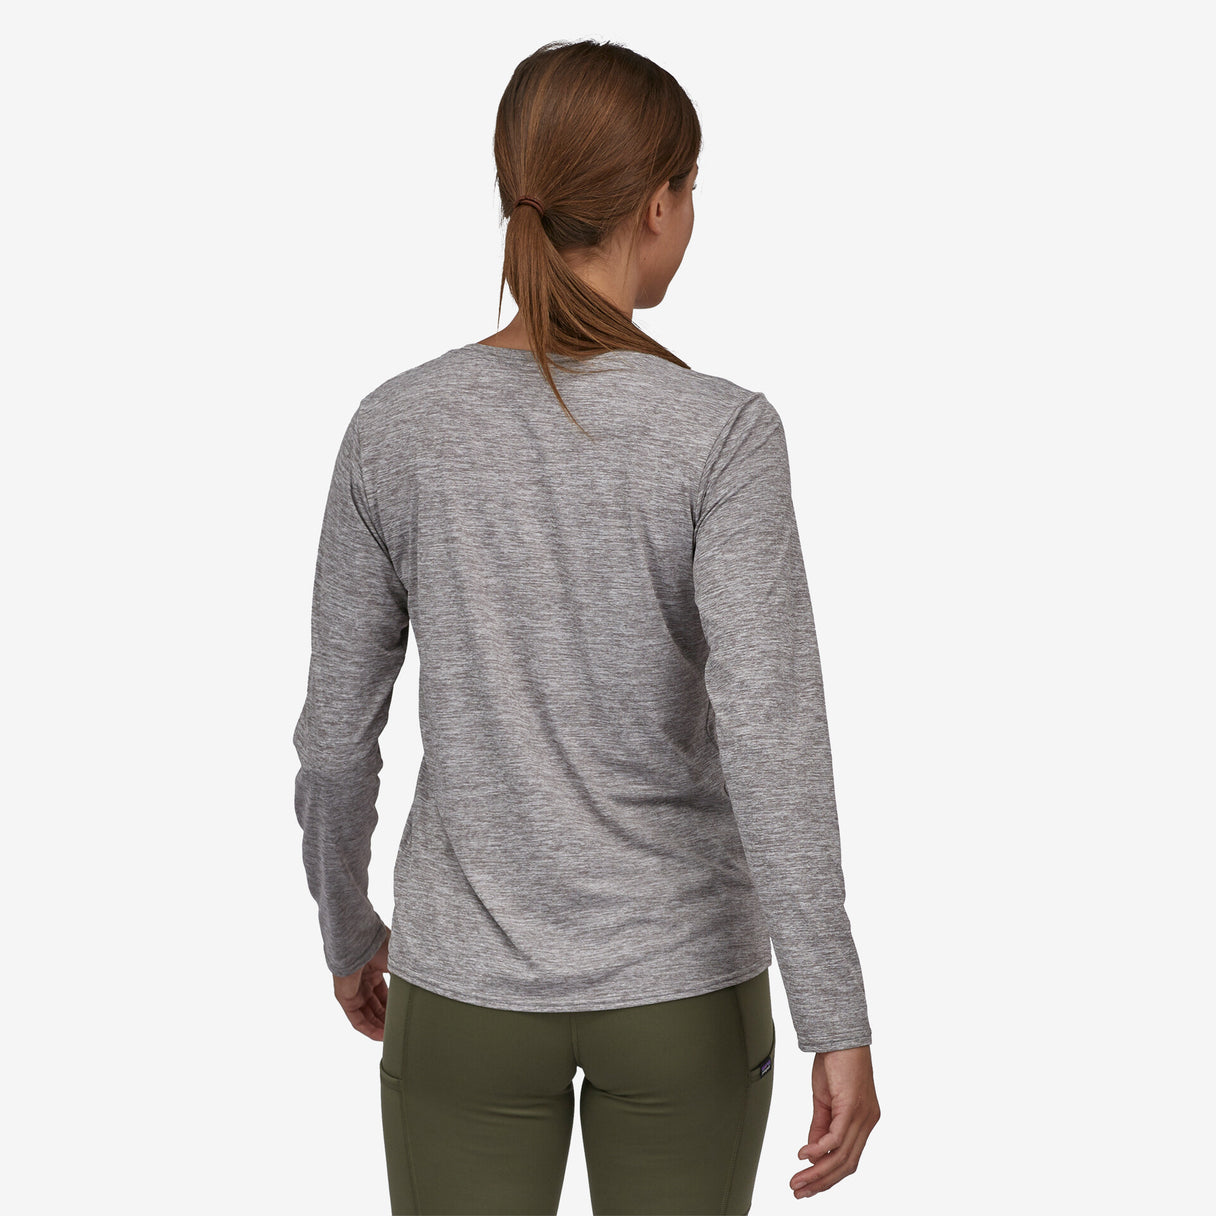 Patagonia Women's Cap Cool Daily Long-Sleeve Shirt - Feather Grey